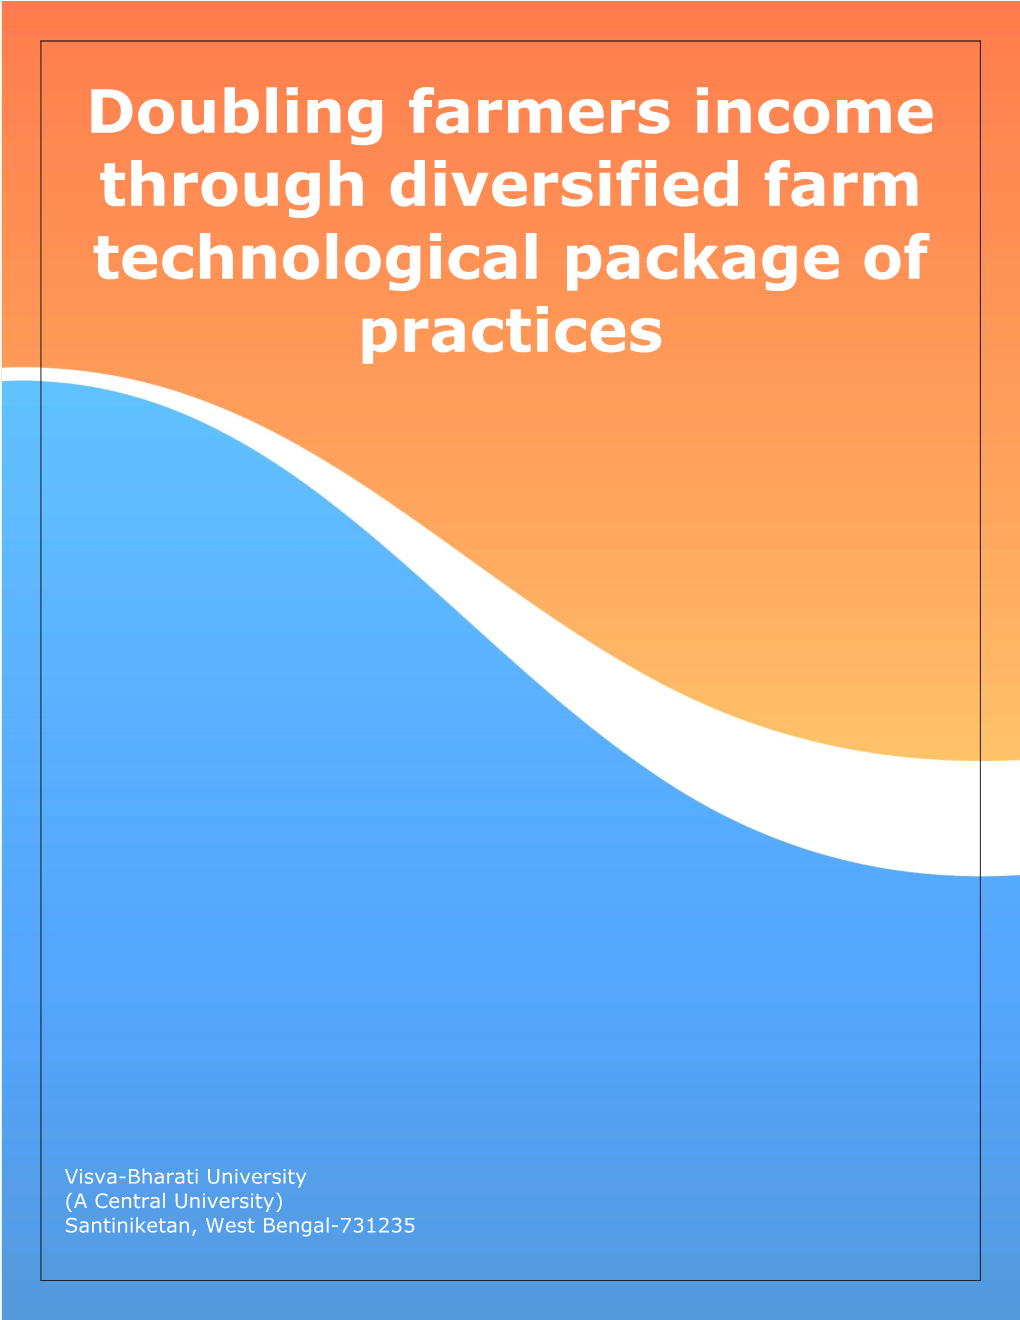 Doubling Farmers Income Through Diversified Farm Technological